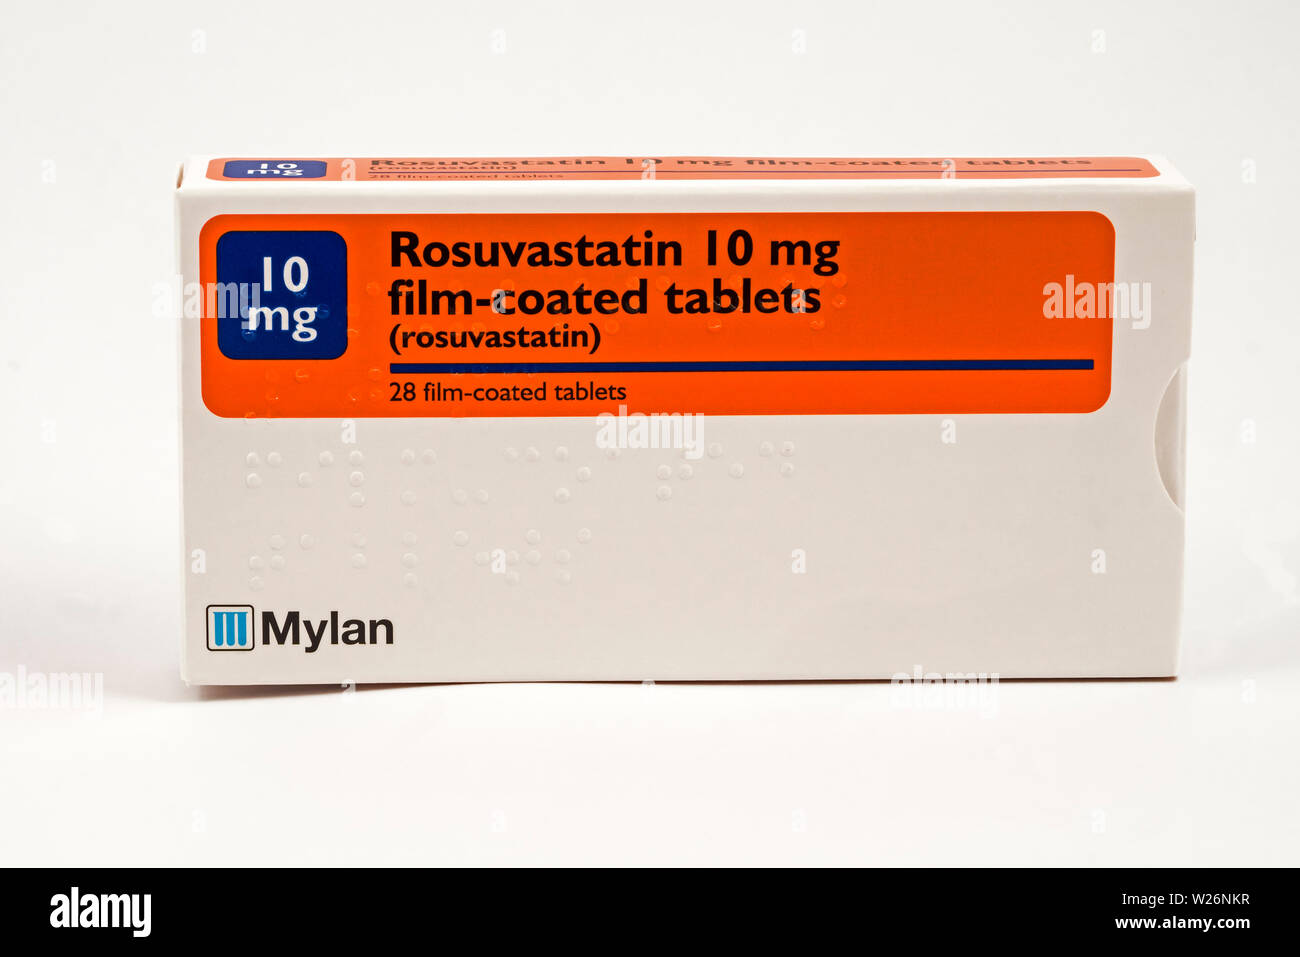 Rosuvastatin, a statin medicine to lower cholesterol. Also sold under the trade name Crestor. Stock Photo